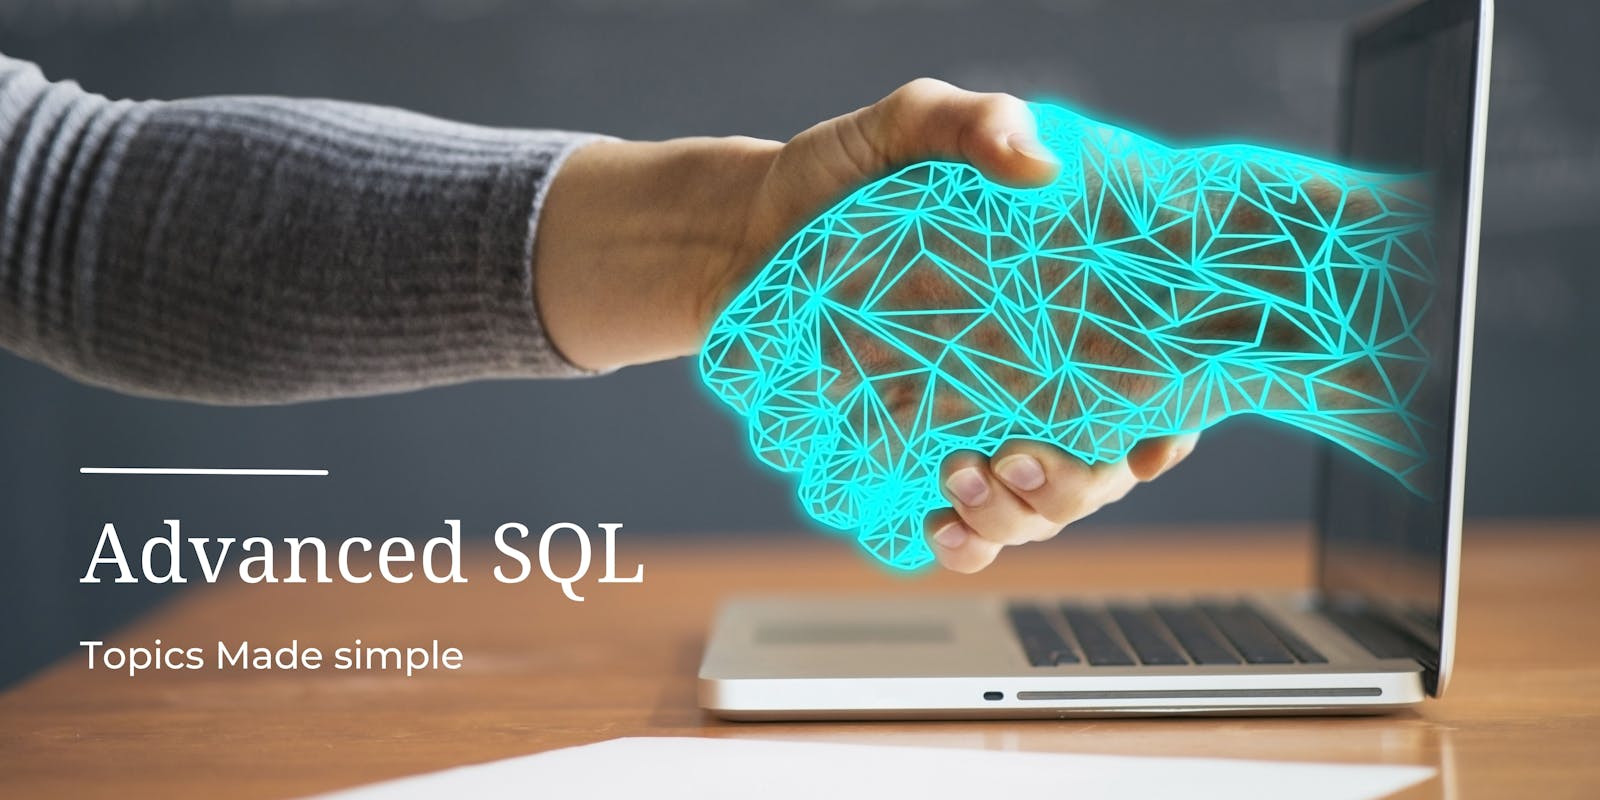 Advanced SQL techniques for business analysis